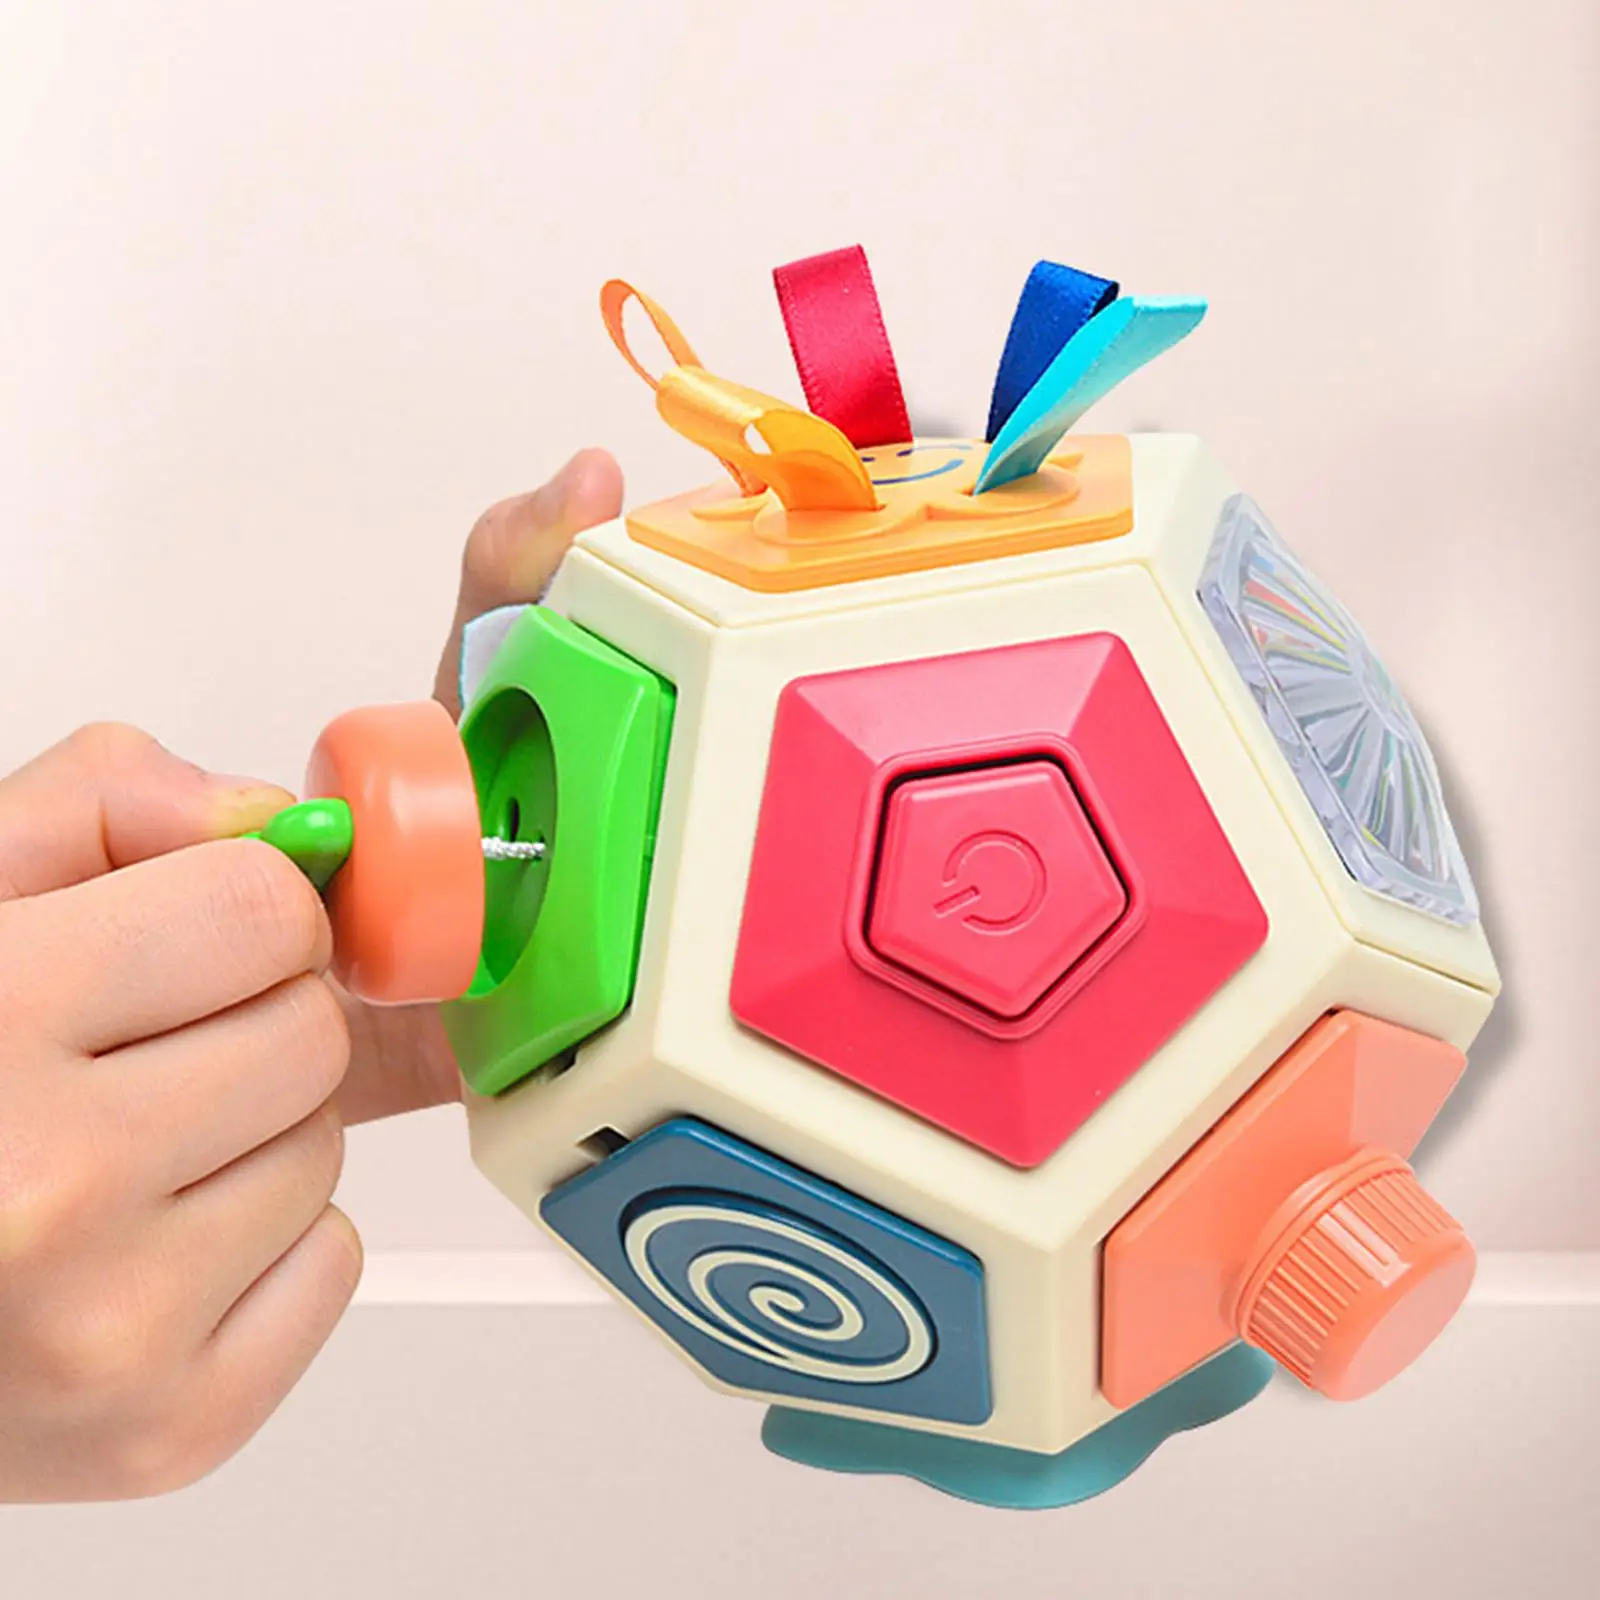 Baby Busy Ball Sensory Toy Early Education Busy Hand Grasping Ball for Kids